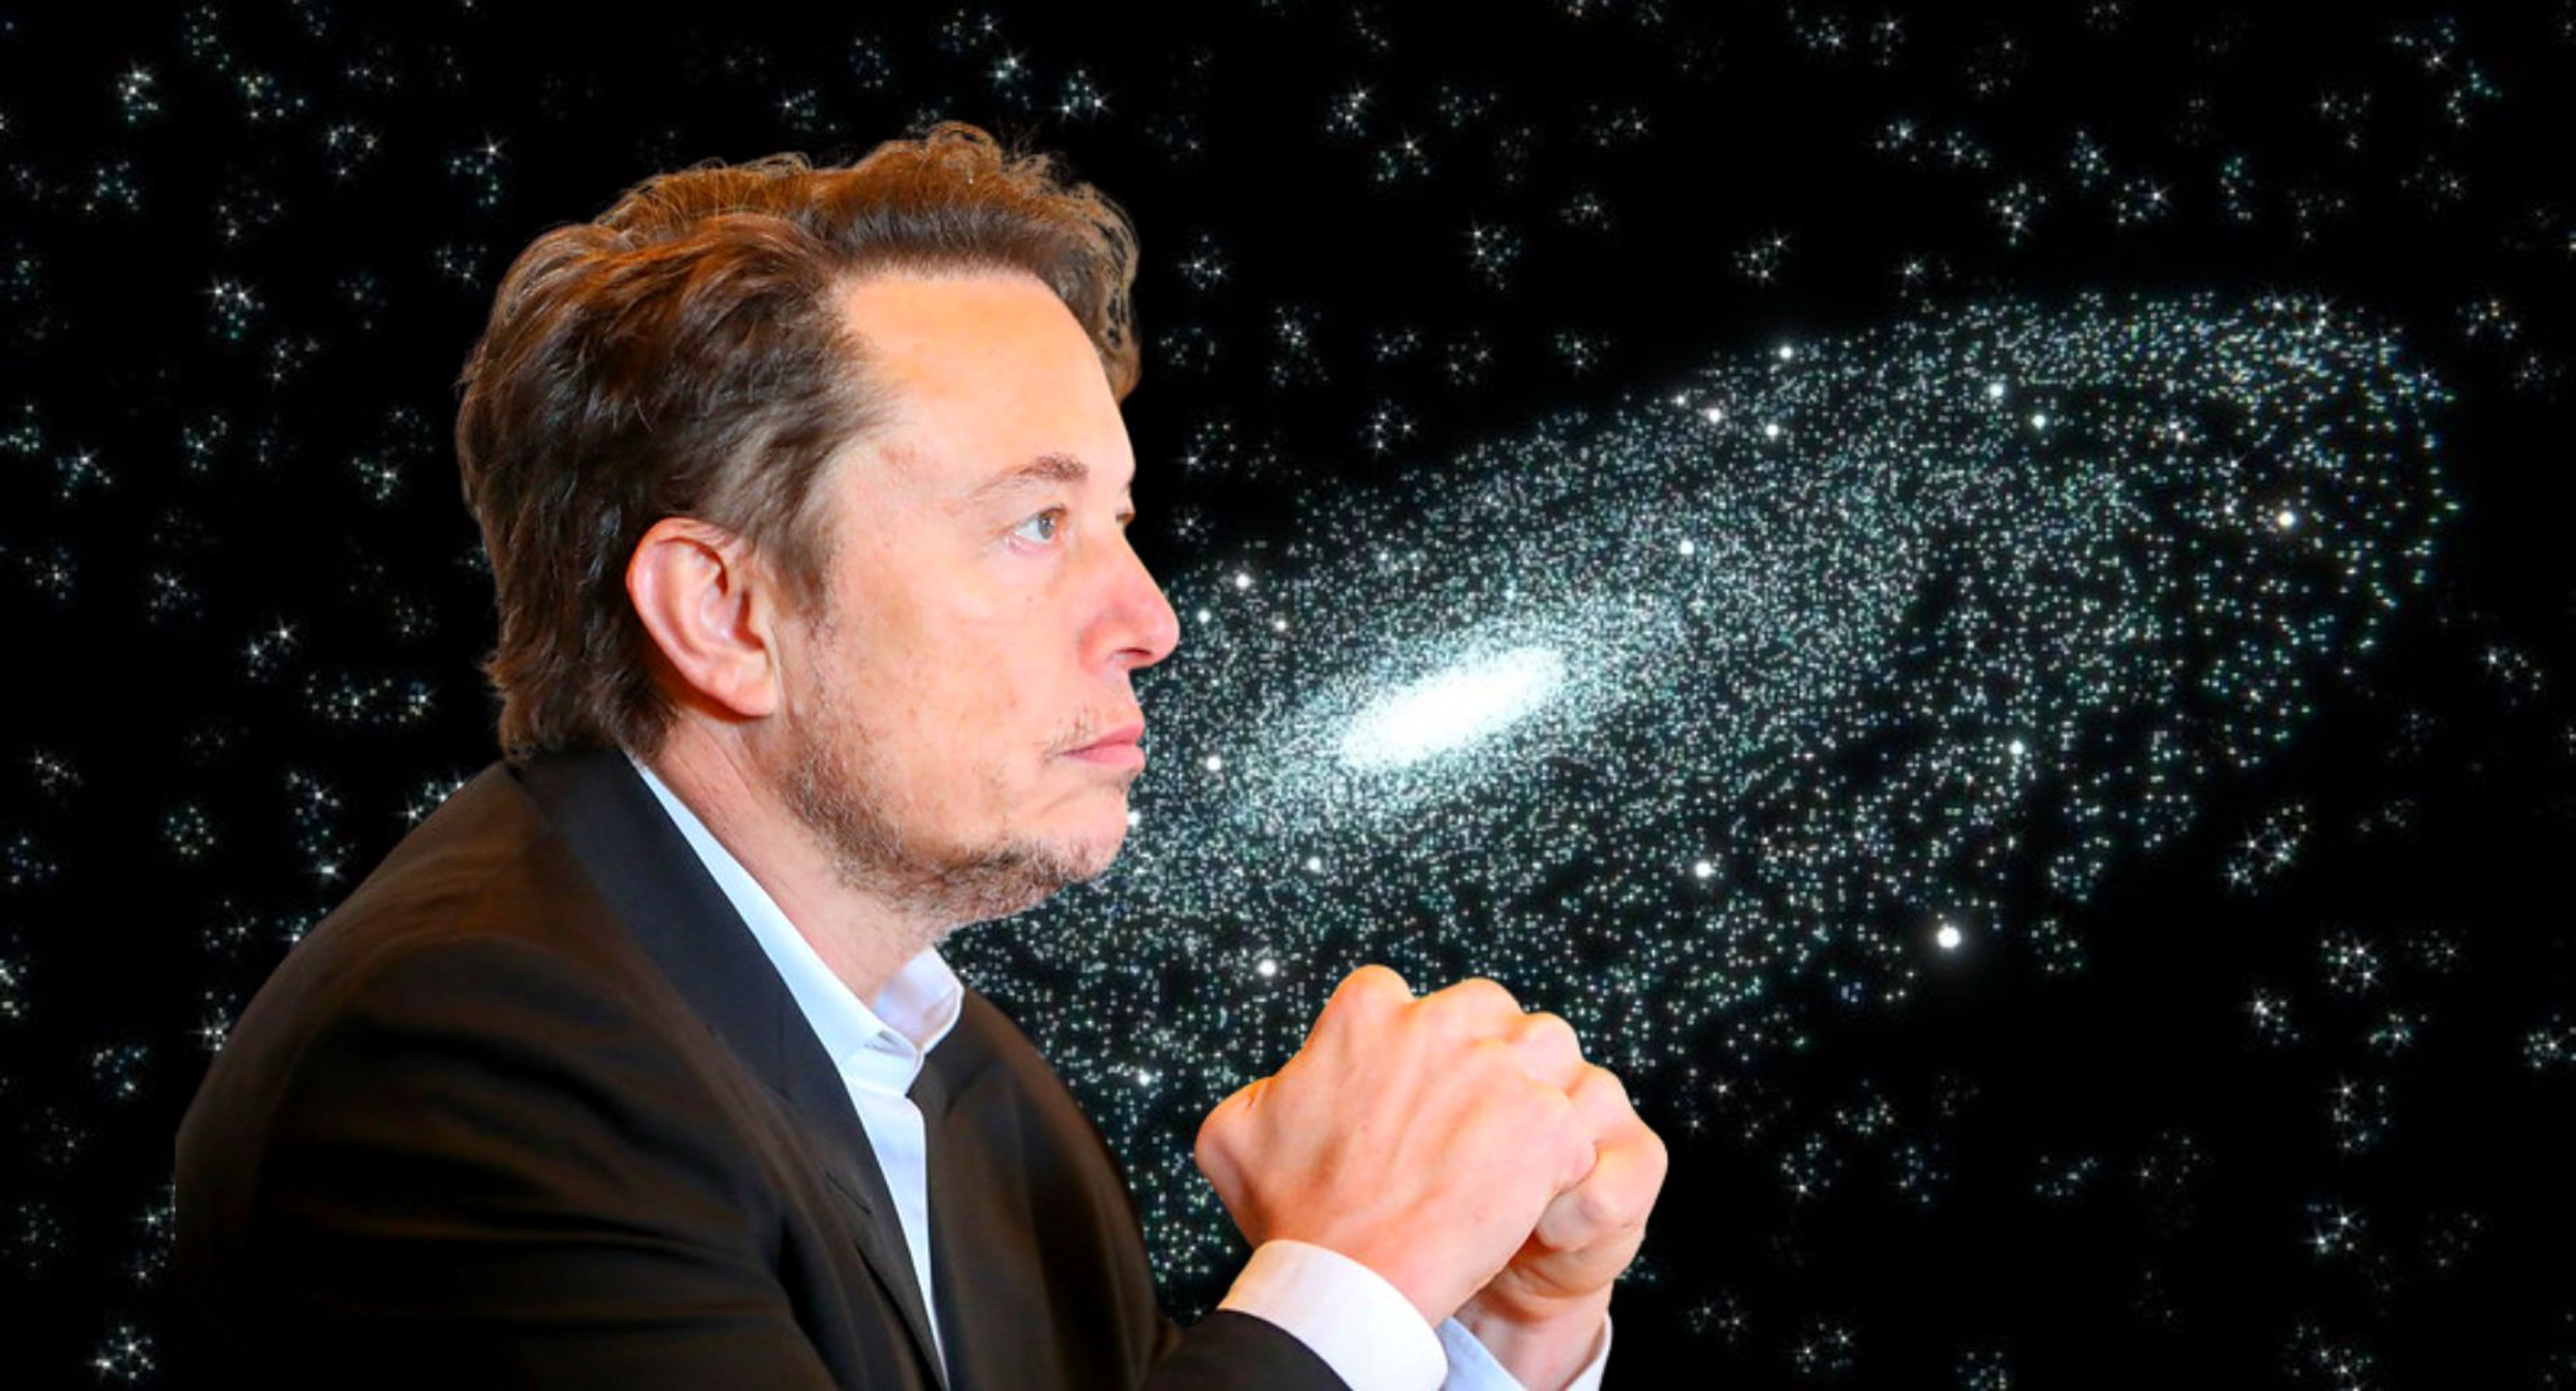 Elon Musk On How To Understand The Meaning Of Life And Why We Should Be A Multi-Planet Species